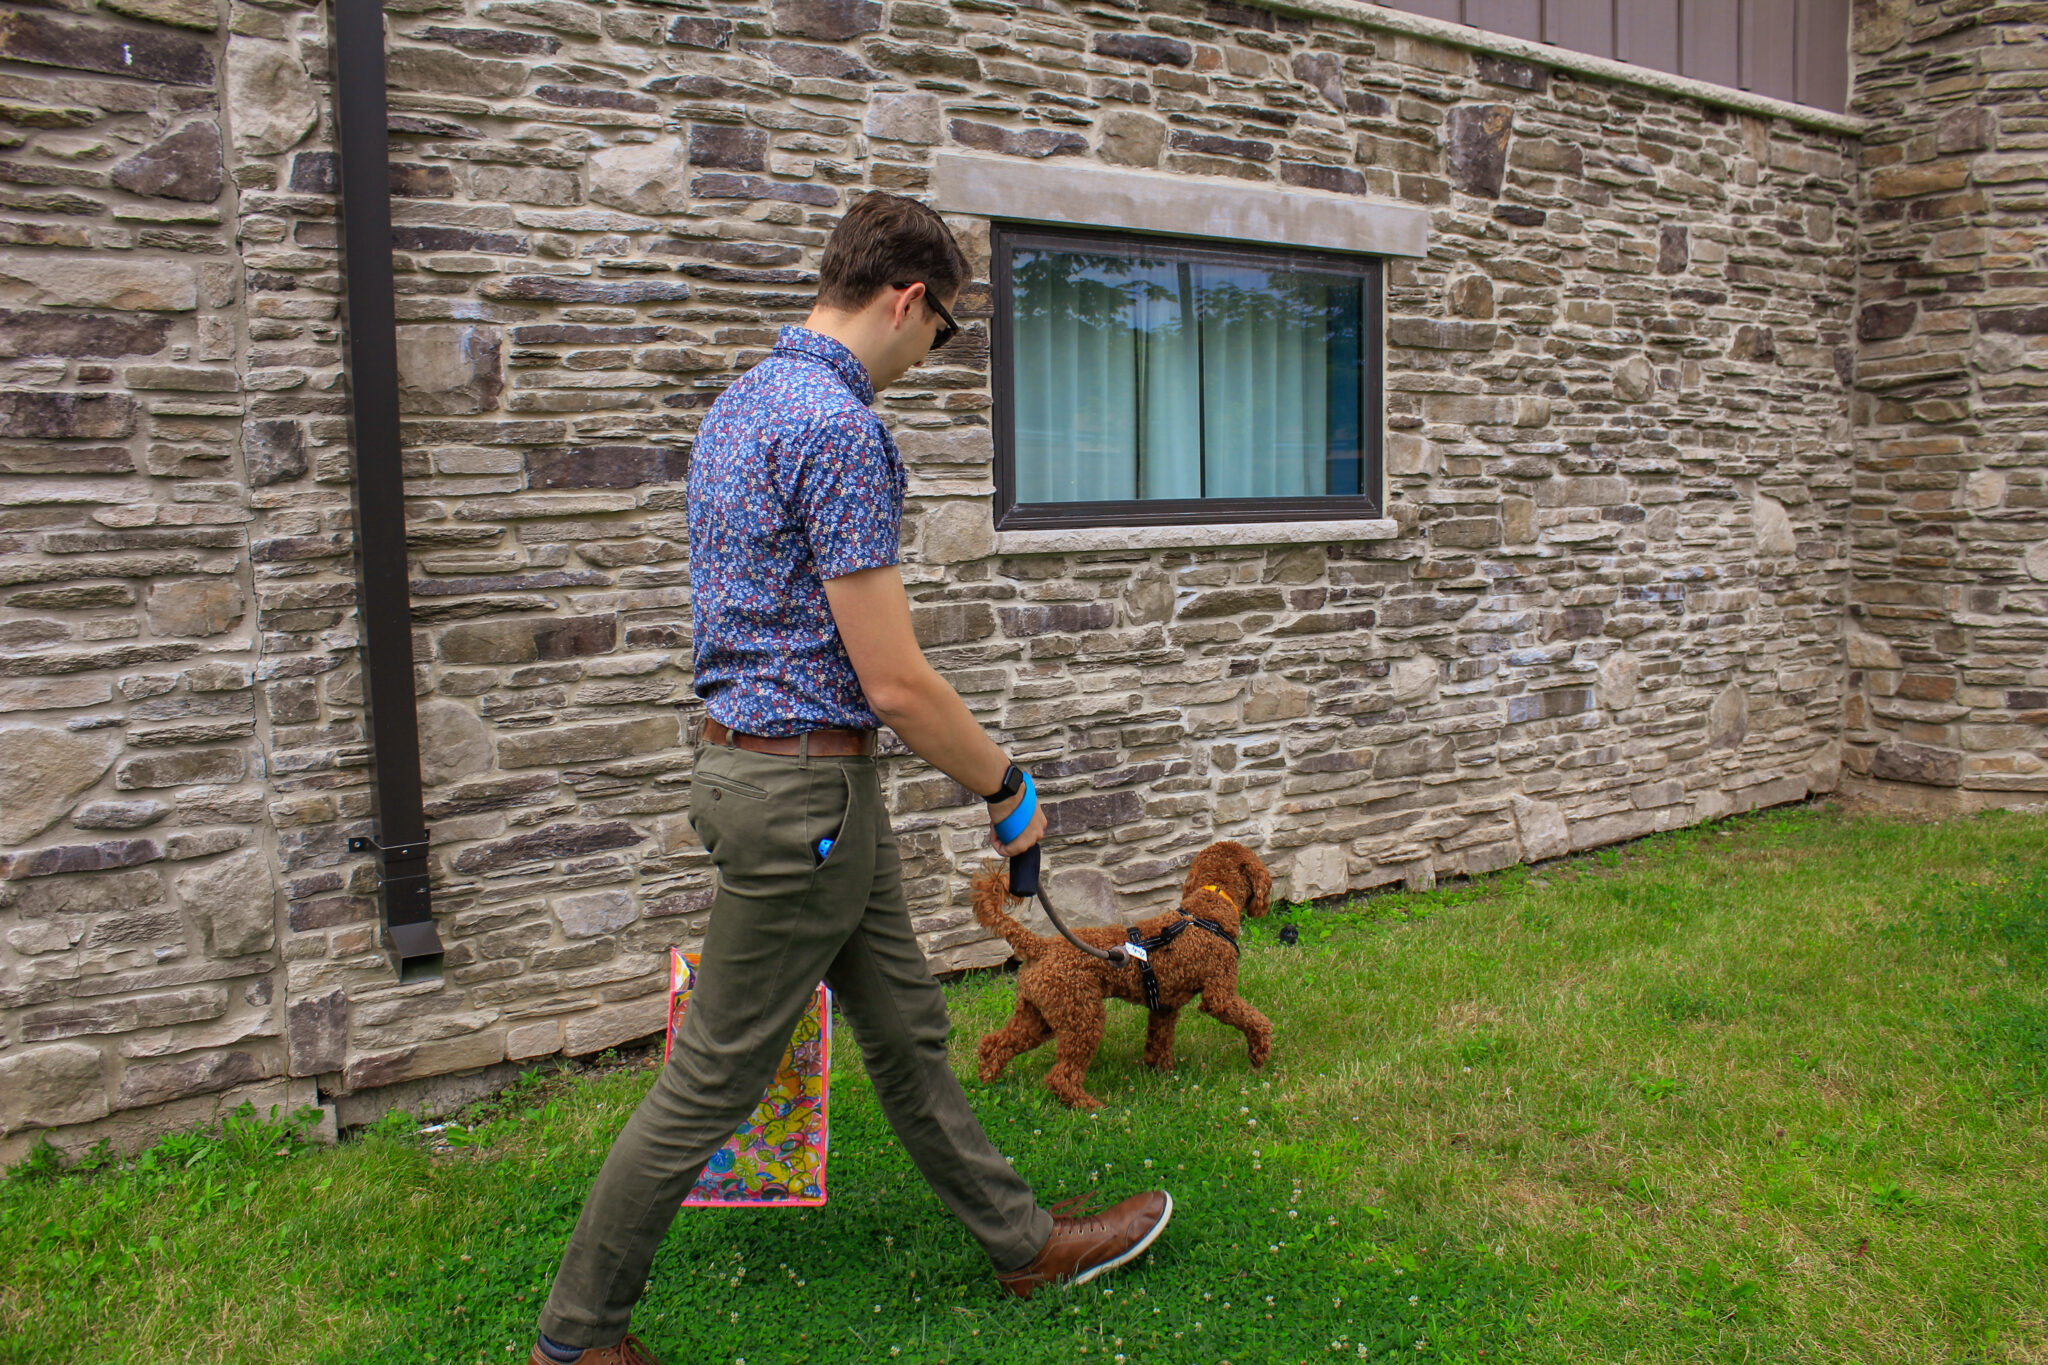 dog friendly areas for potty breaks